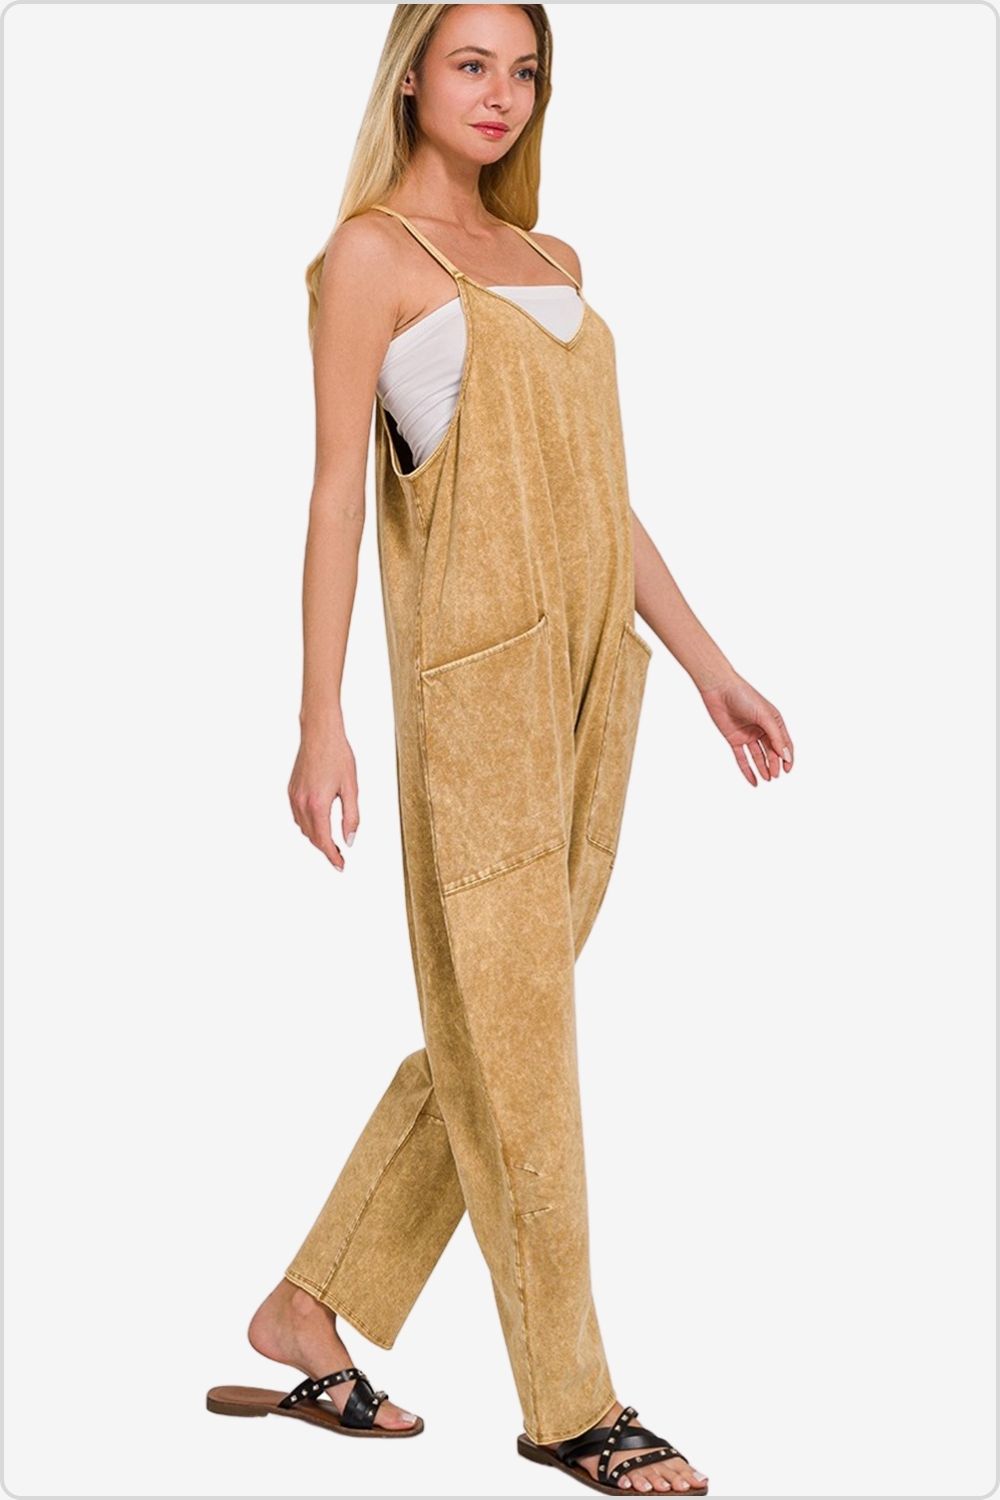 Relaxed spaghetti strap jumpsuit with pockets in a soft tan shade.